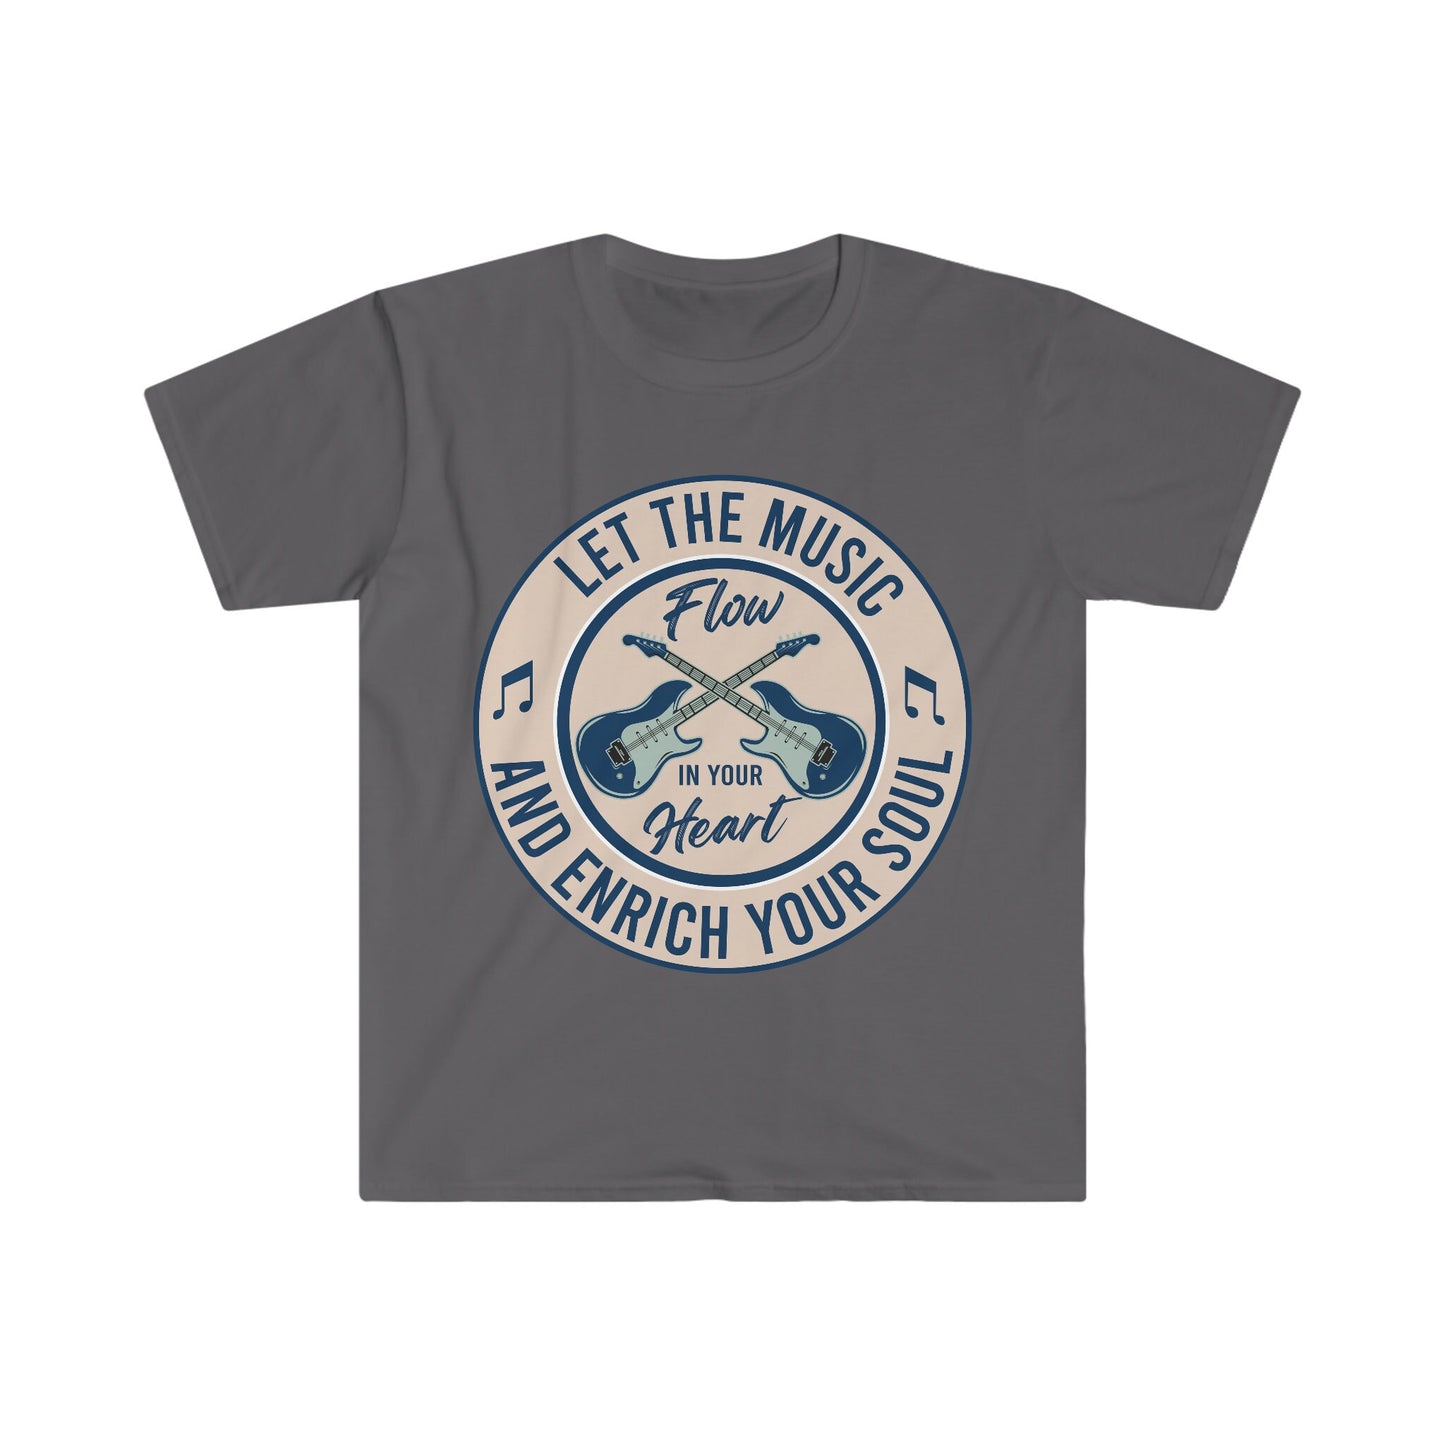 Let the Music Flow and Enrich Your Soul - Unisex Softstyle T-Shirt